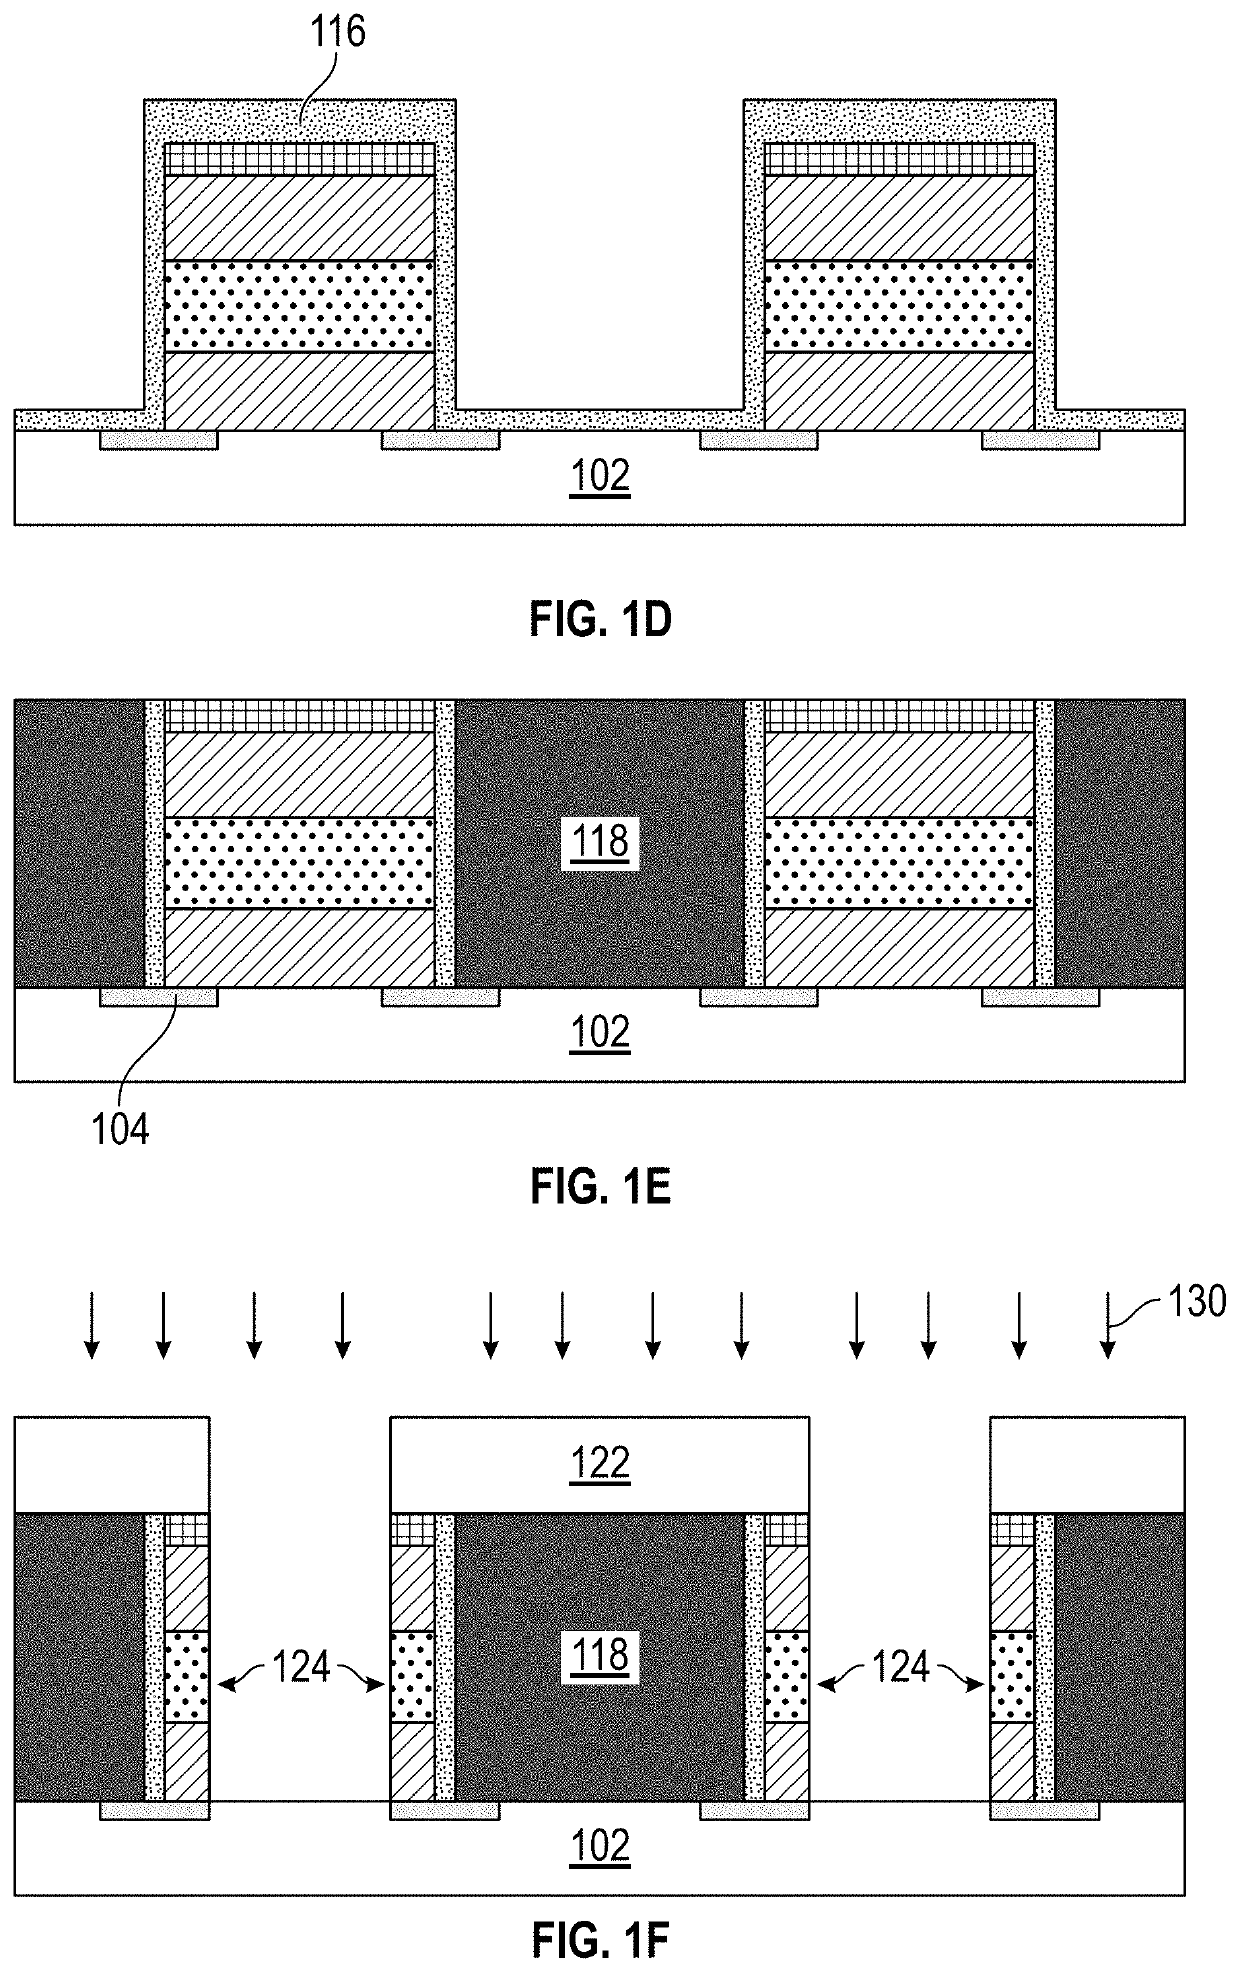 Method of making a plurality of high density logic elements with advanced CMOS device layout